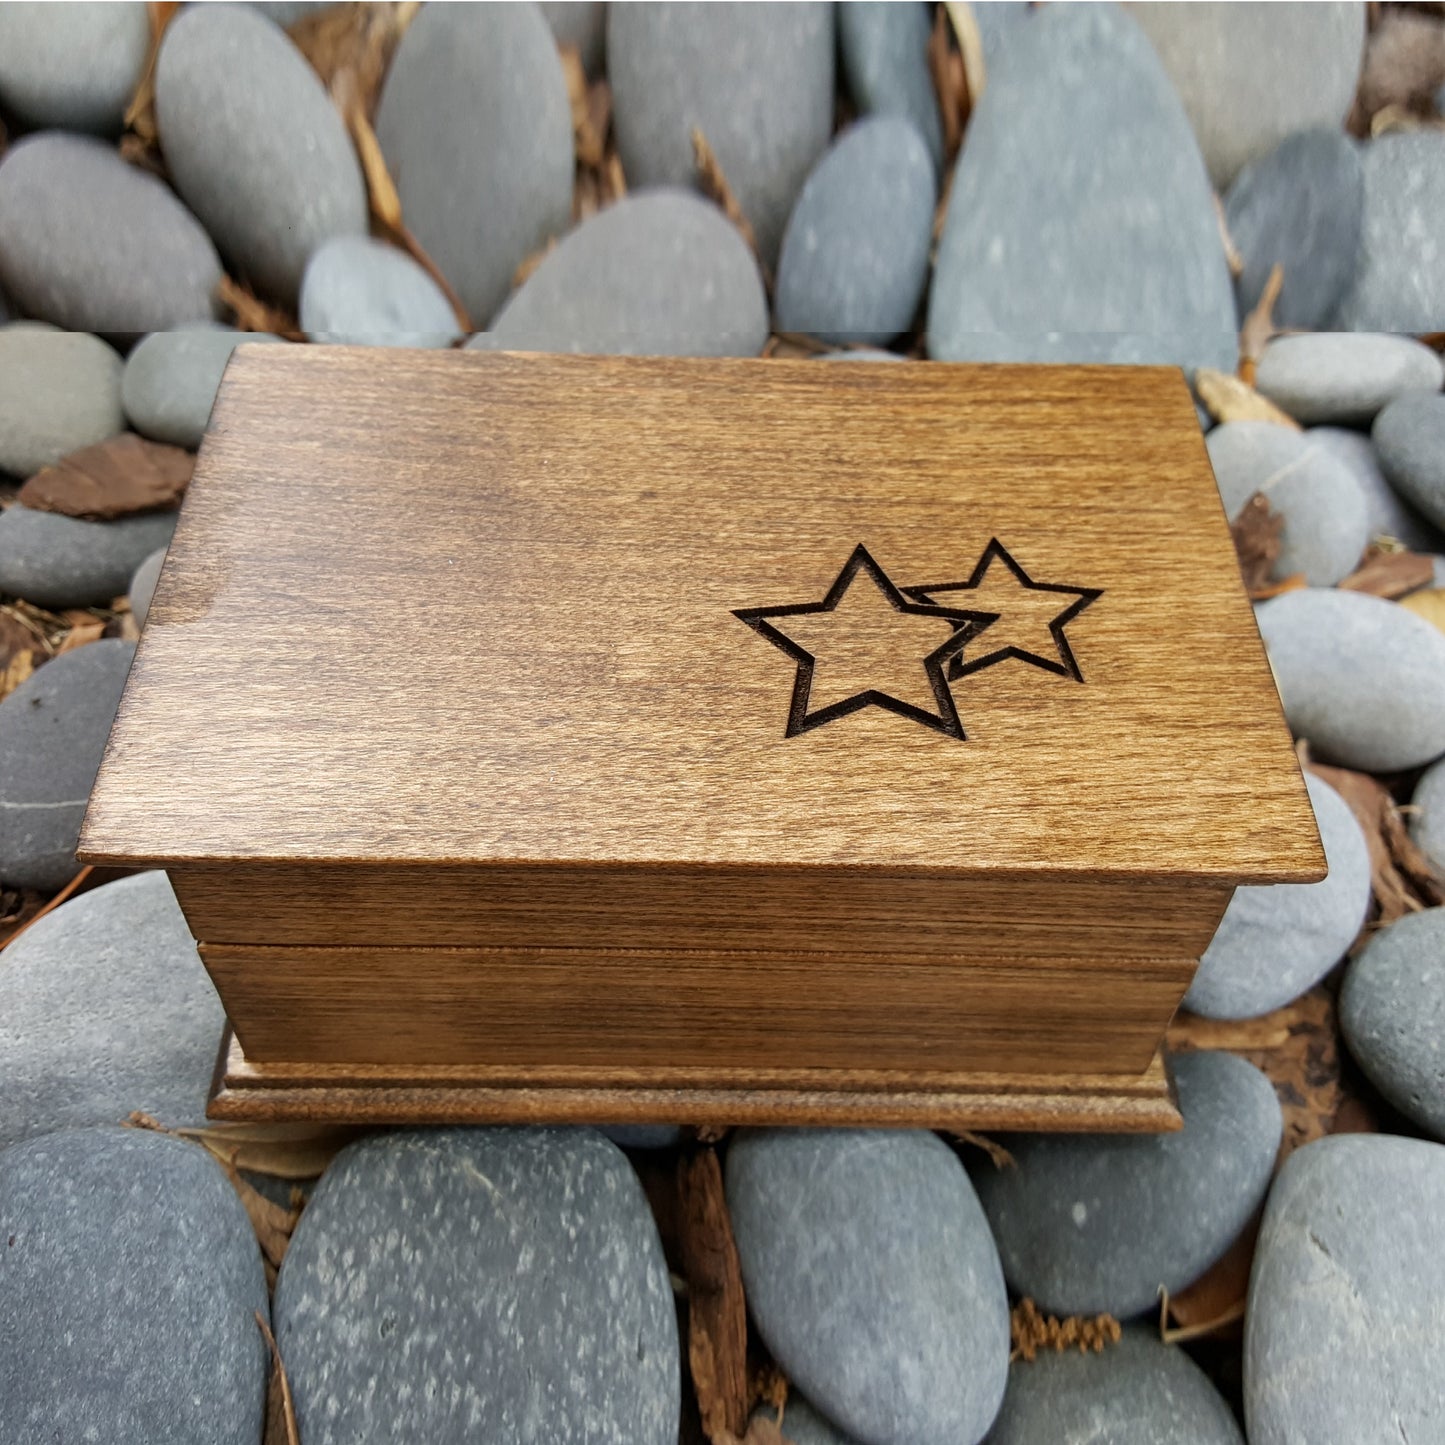 Stars jewelry box with built in music player, choose color and song